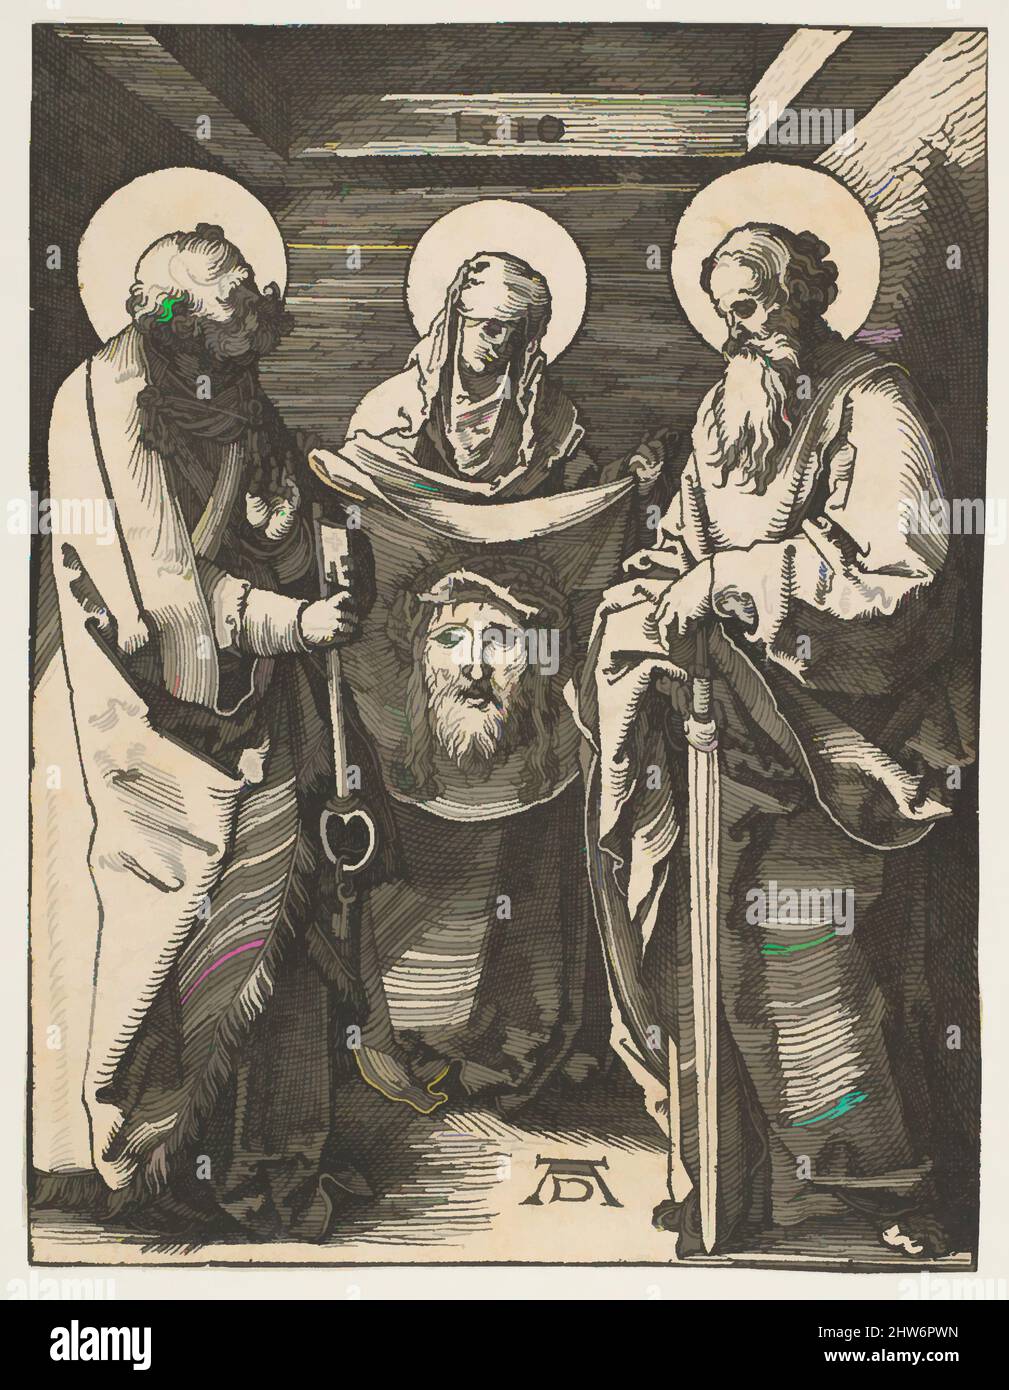 Art inspired by Saint Veronica between Saints Peter and Paul, from The Small Passion, 1510, Woodcut, sheet: 5 1/16 x 3 13/16 in. (12.8 x 9.7 cm), Prints, Albrecht Dürer (German, Nuremberg 1471–1528 Nuremberg, Classic works modernized by Artotop with a splash of modernity. Shapes, color and value, eye-catching visual impact on art. Emotions through freedom of artworks in a contemporary way. A timeless message pursuing a wildly creative new direction. Artists turning to the digital medium and creating the Artotop NFT Stock Photo